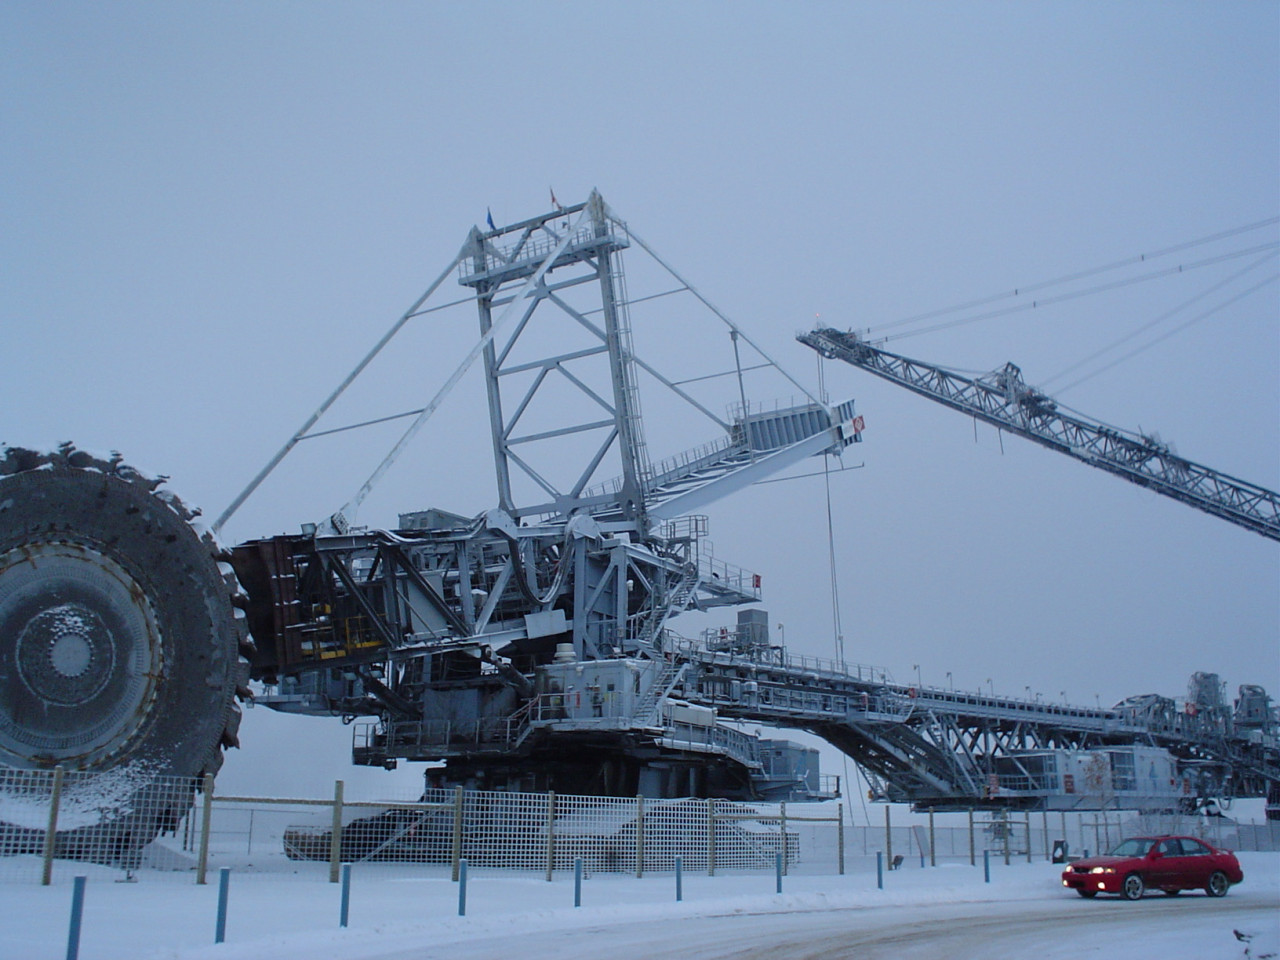 thewelovemachinesposts:
“ A winter pic of that Syncrude Bucketwheel with Nissan Sentra for scale. (1632x1224)
Source: https://imgur.com/AWyuNc9
”